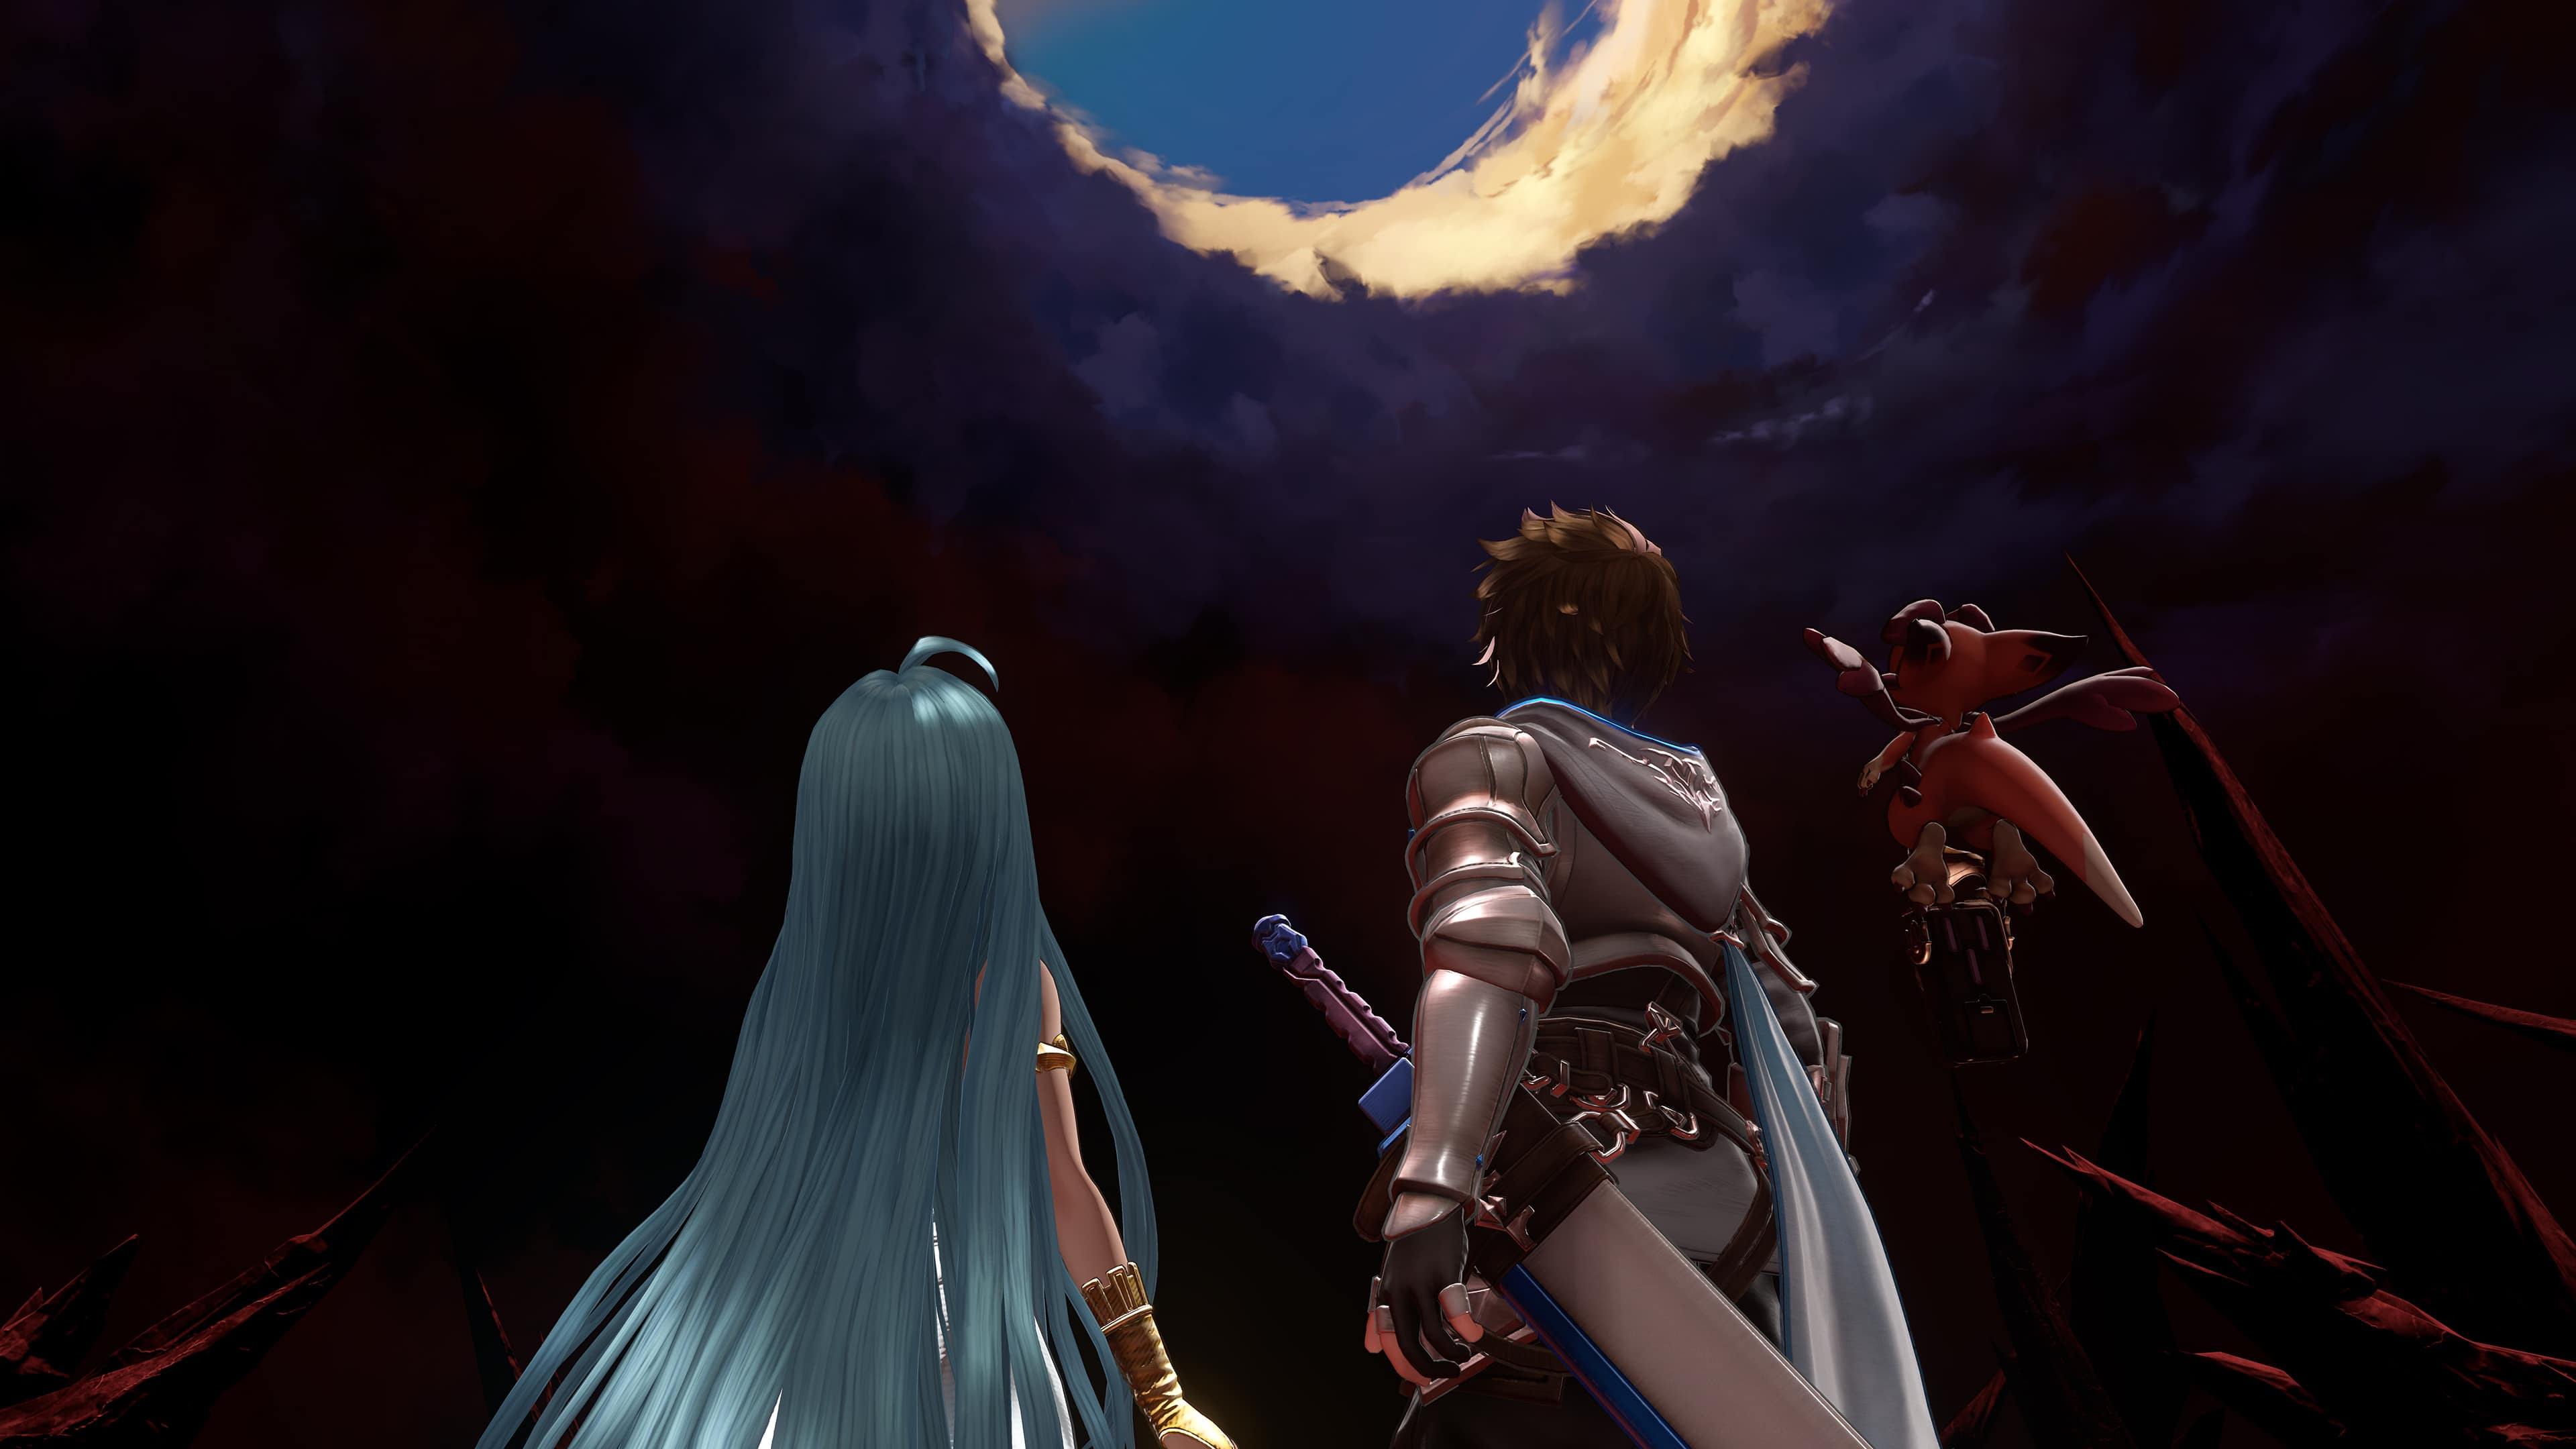 Granblue Fantasy Relink crossplay: The player's party looking up at a hole in the clouds